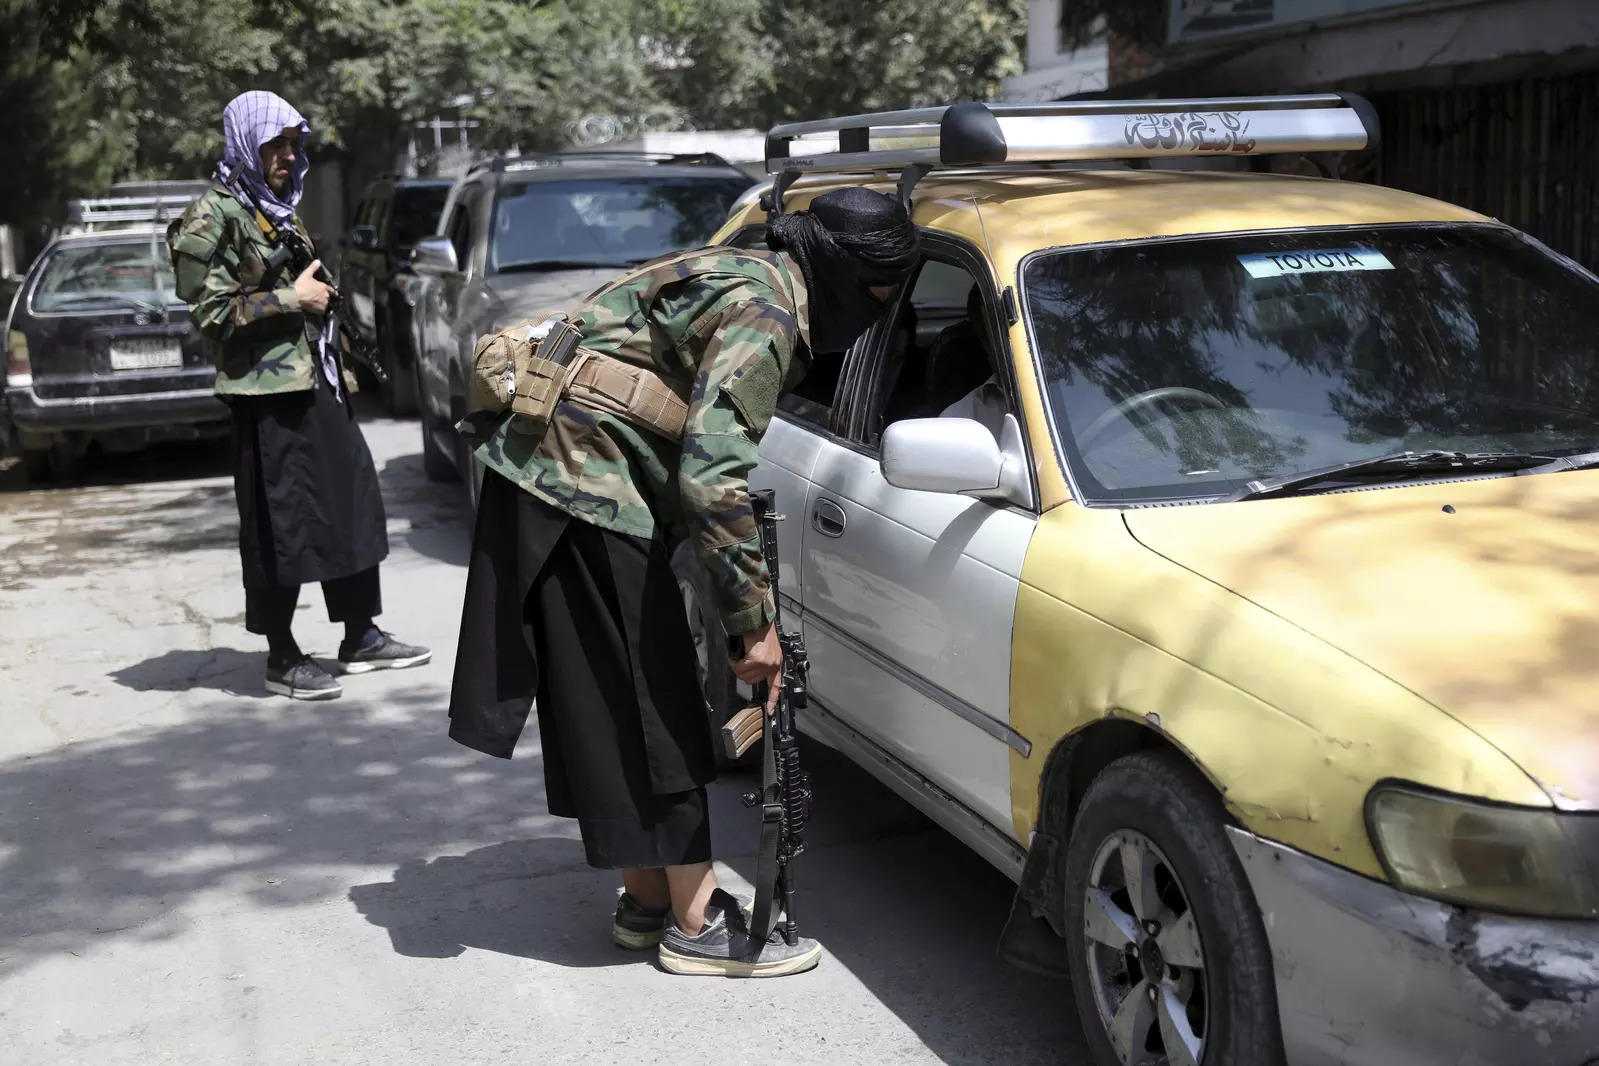 Taliban fighters search a vehicle at a checkpoint on the road in the Wazir Akbar Khan neighborhood in the city of Kabul 